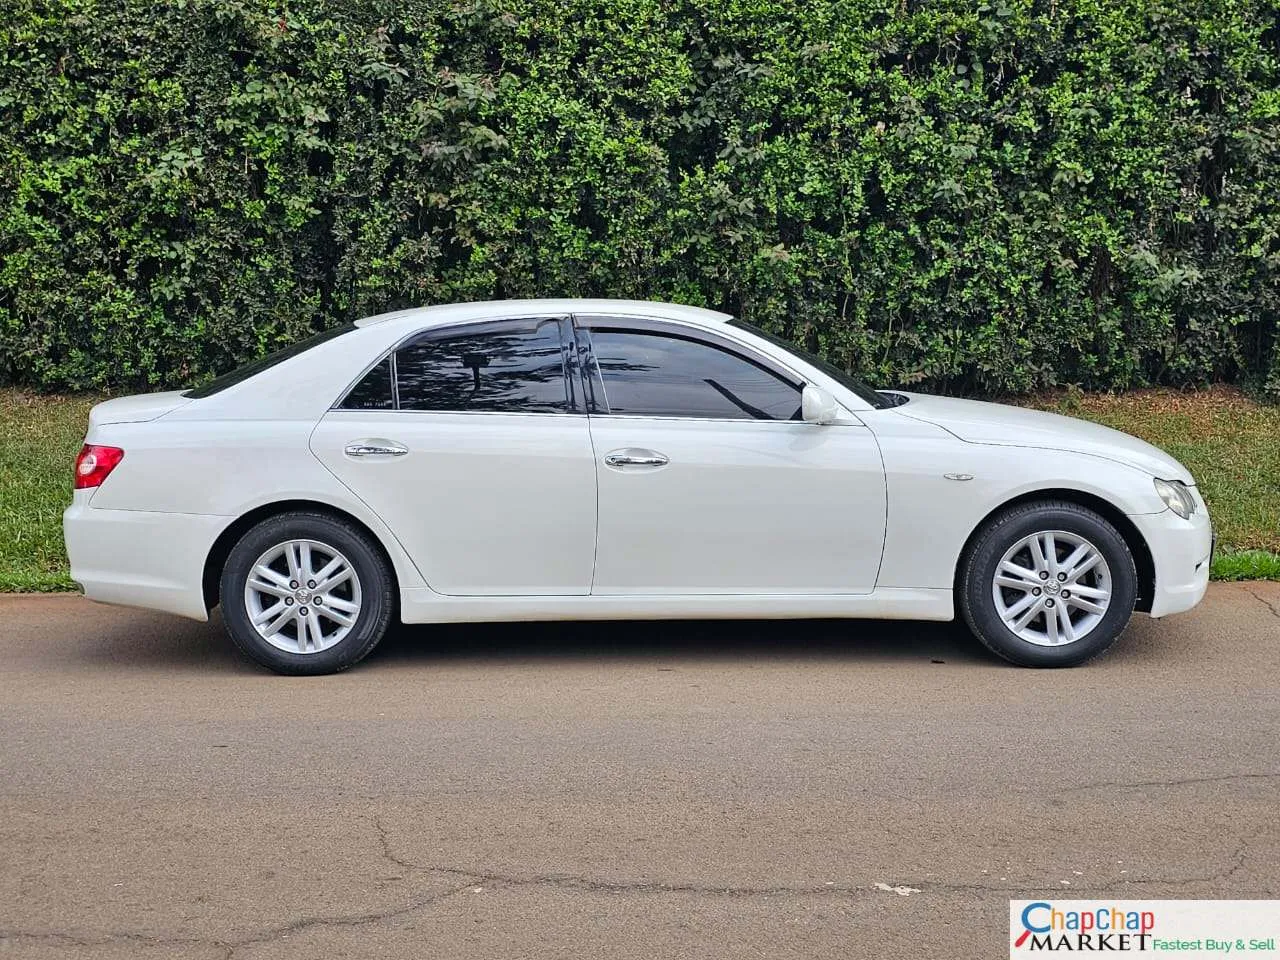 Cars Cars For Sale/Vehicles-Toyota Mark X for sale in Kenya 🔥 You Pay 30% Deposit Trade in OK EXCLUSIVE 9